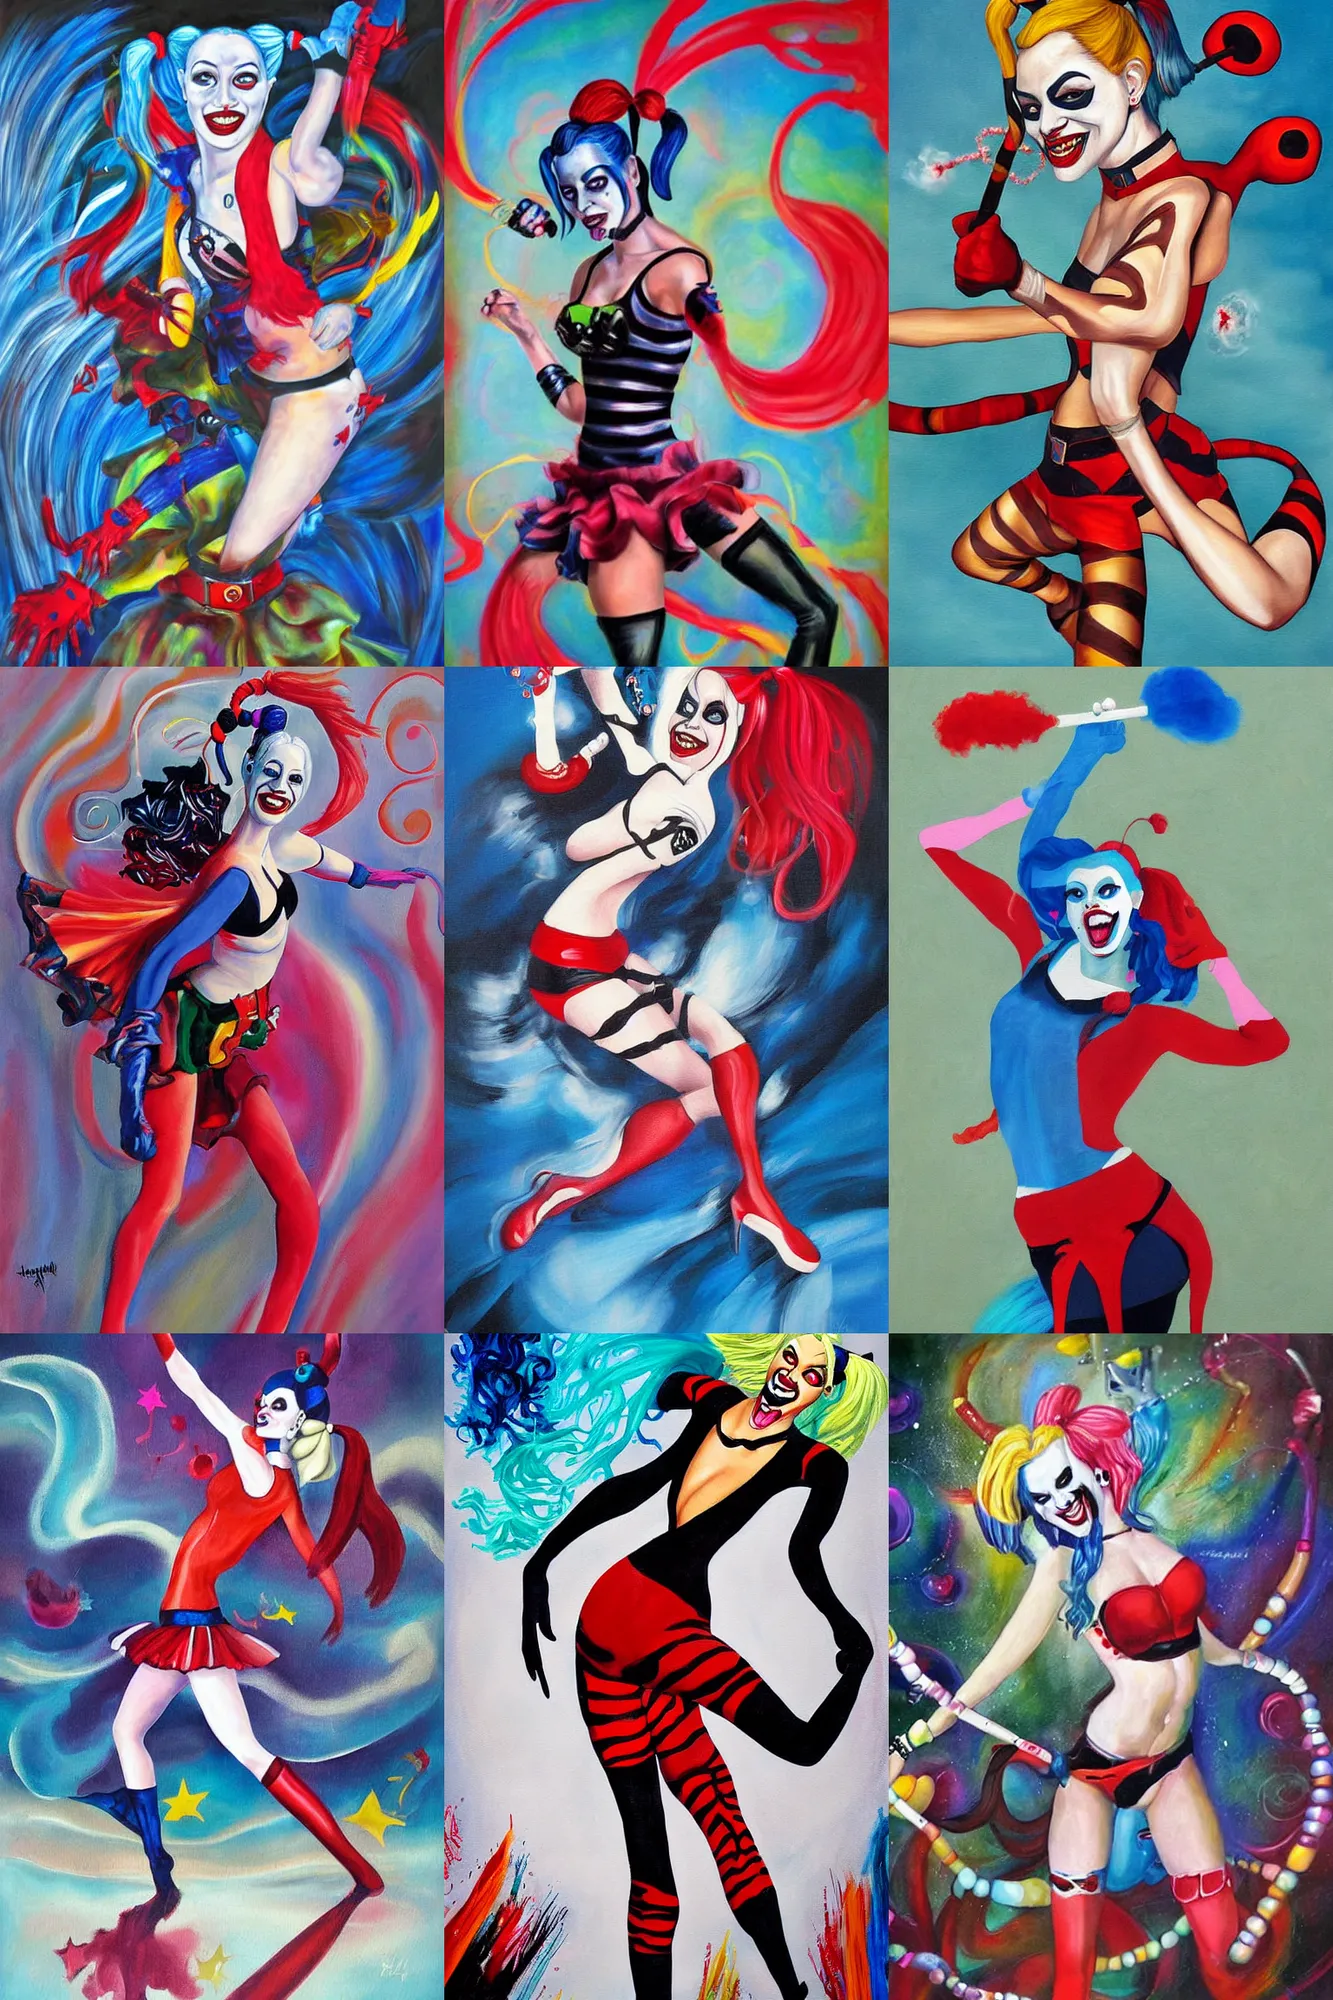 Prompt: Surreal painting of Harley Quinn doing a swirling pirouette